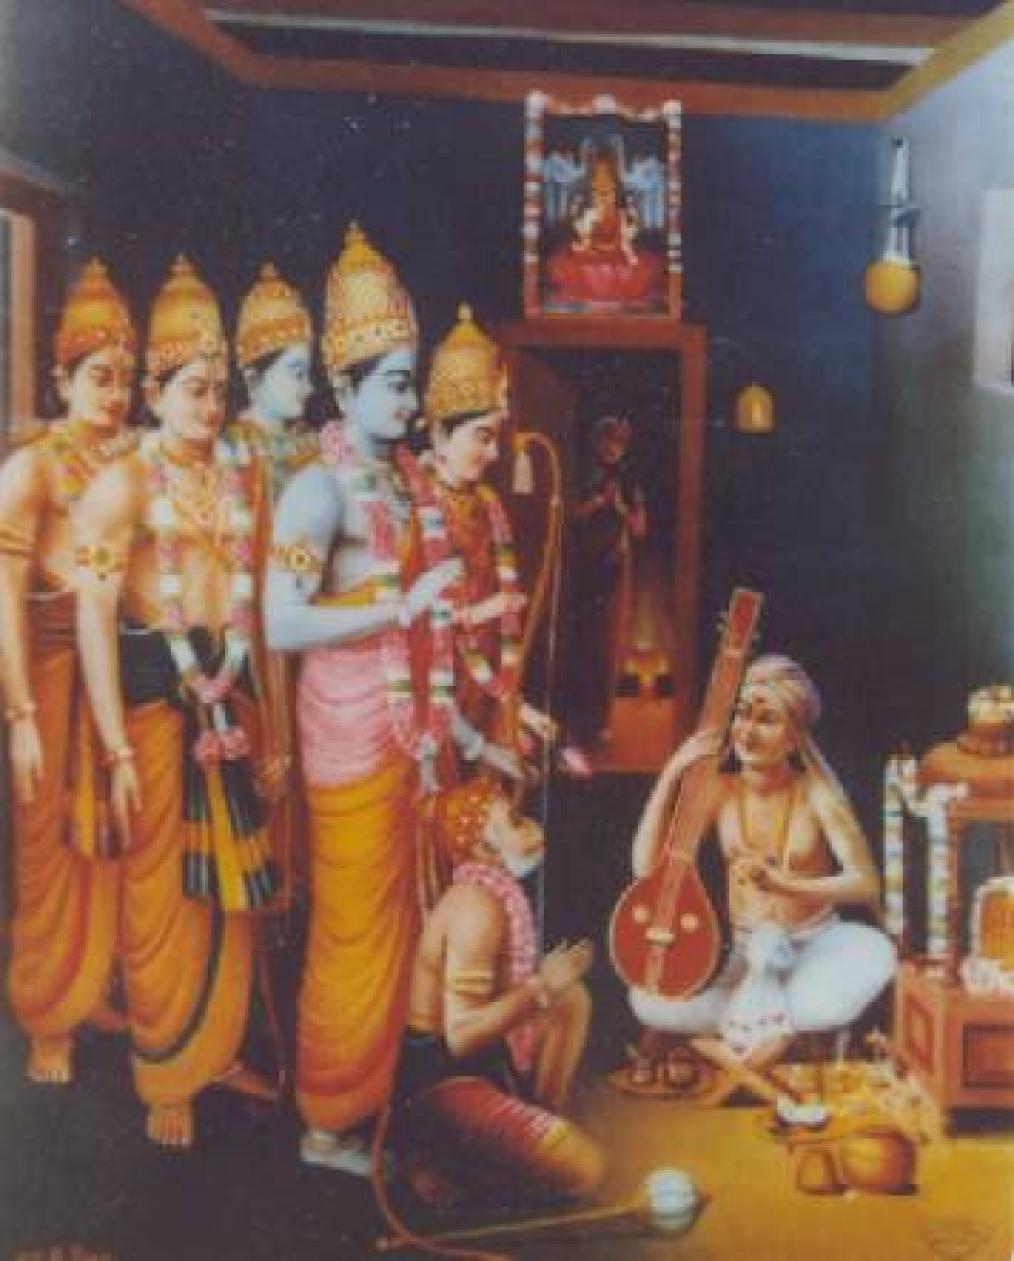 Translations Of Some Songs Of Carntic Music English Meaning Of 653 Thyagaraja Krithis Arranged In Alphabetical Order Keep following us for more interesting videos. english meaning